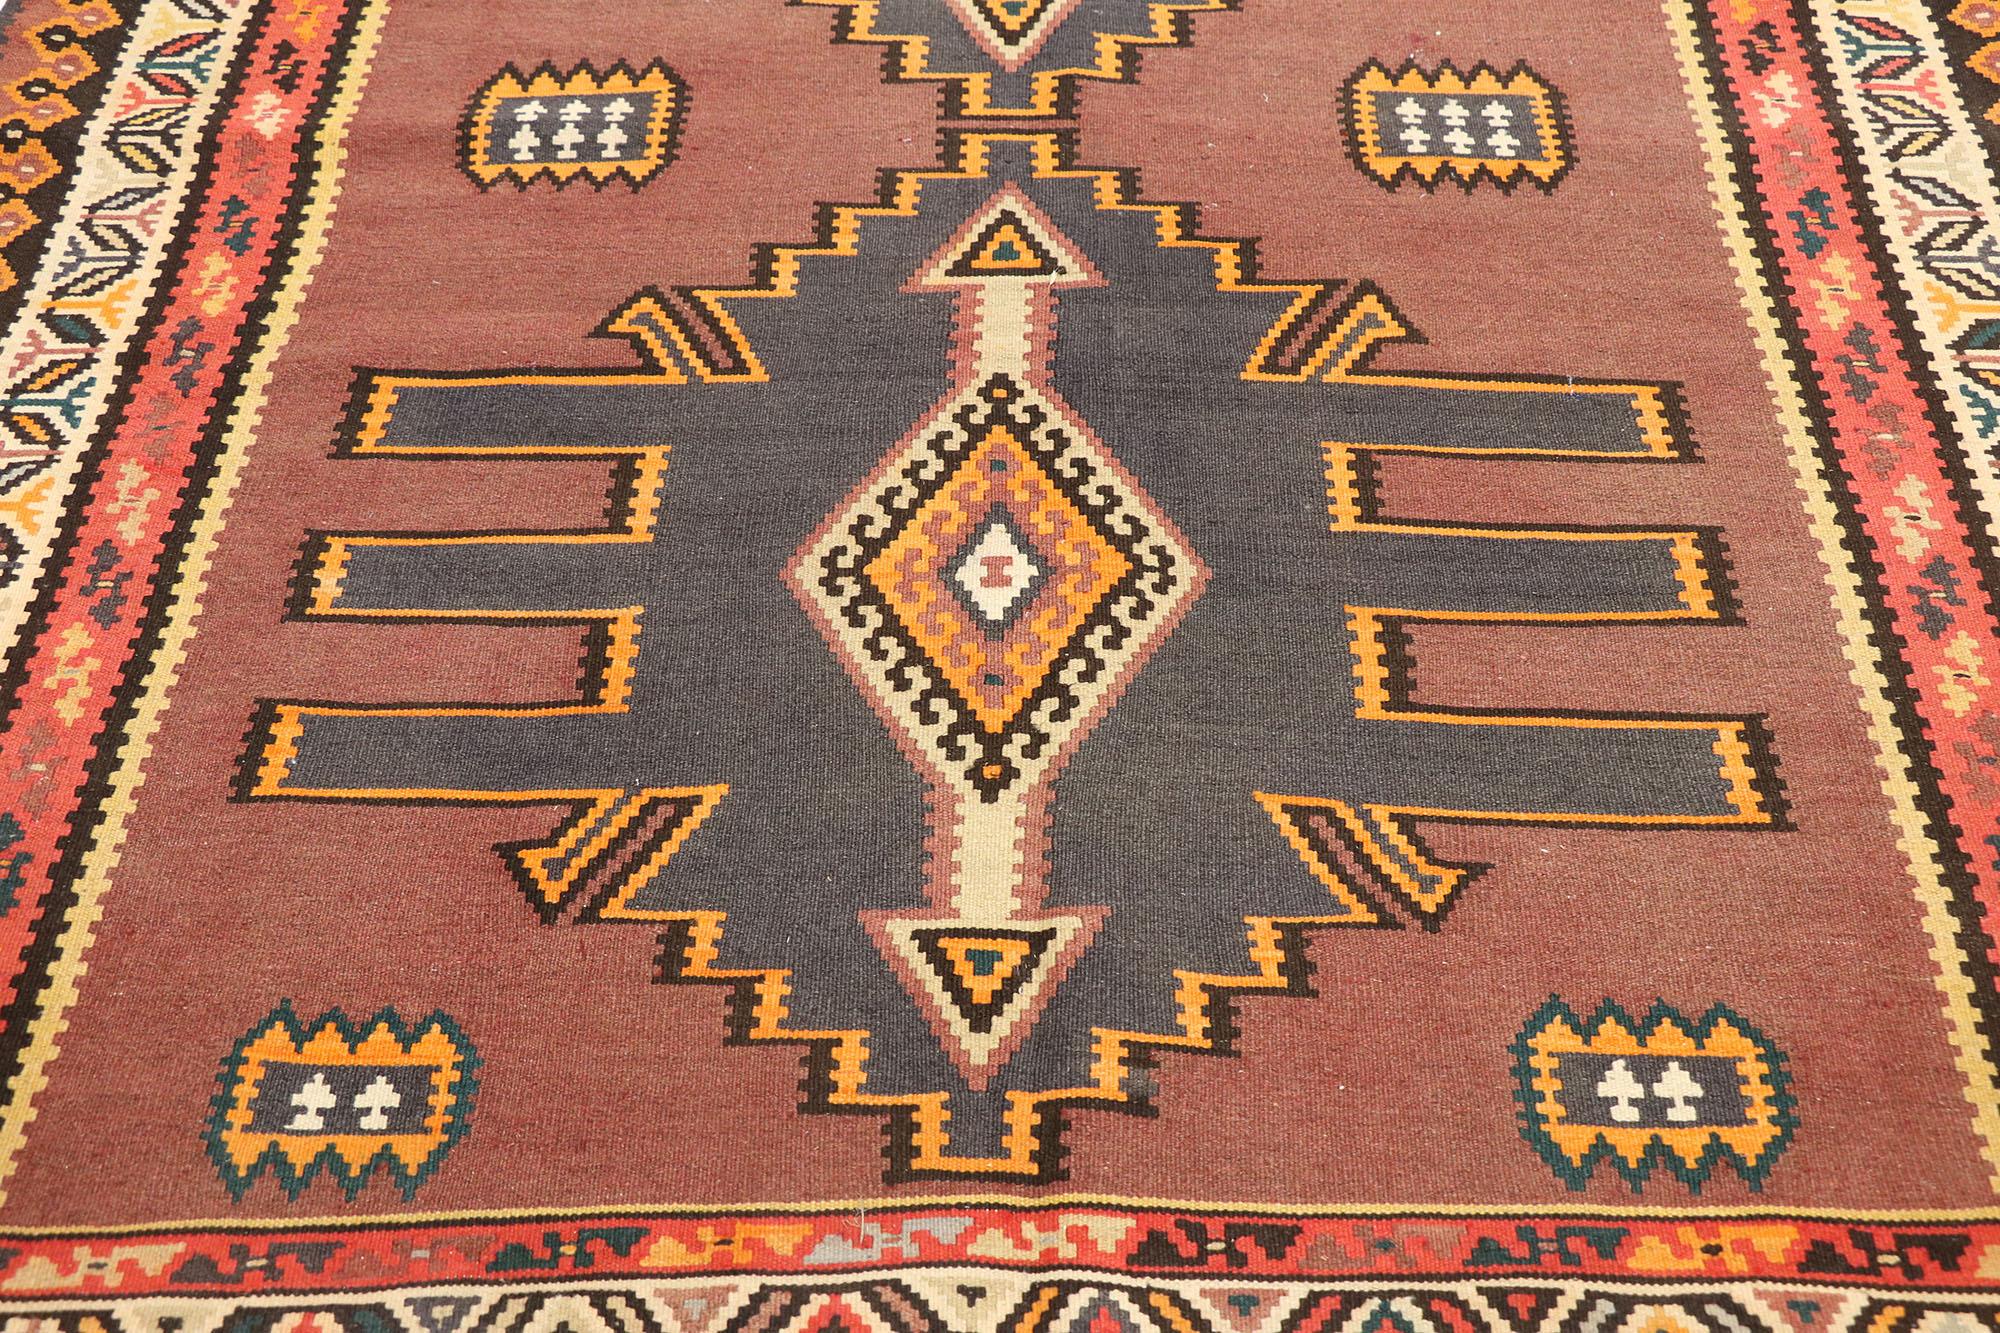 Vintage Turkish Kilim Gallery Rug with Tribal Style In Good Condition For Sale In Dallas, TX